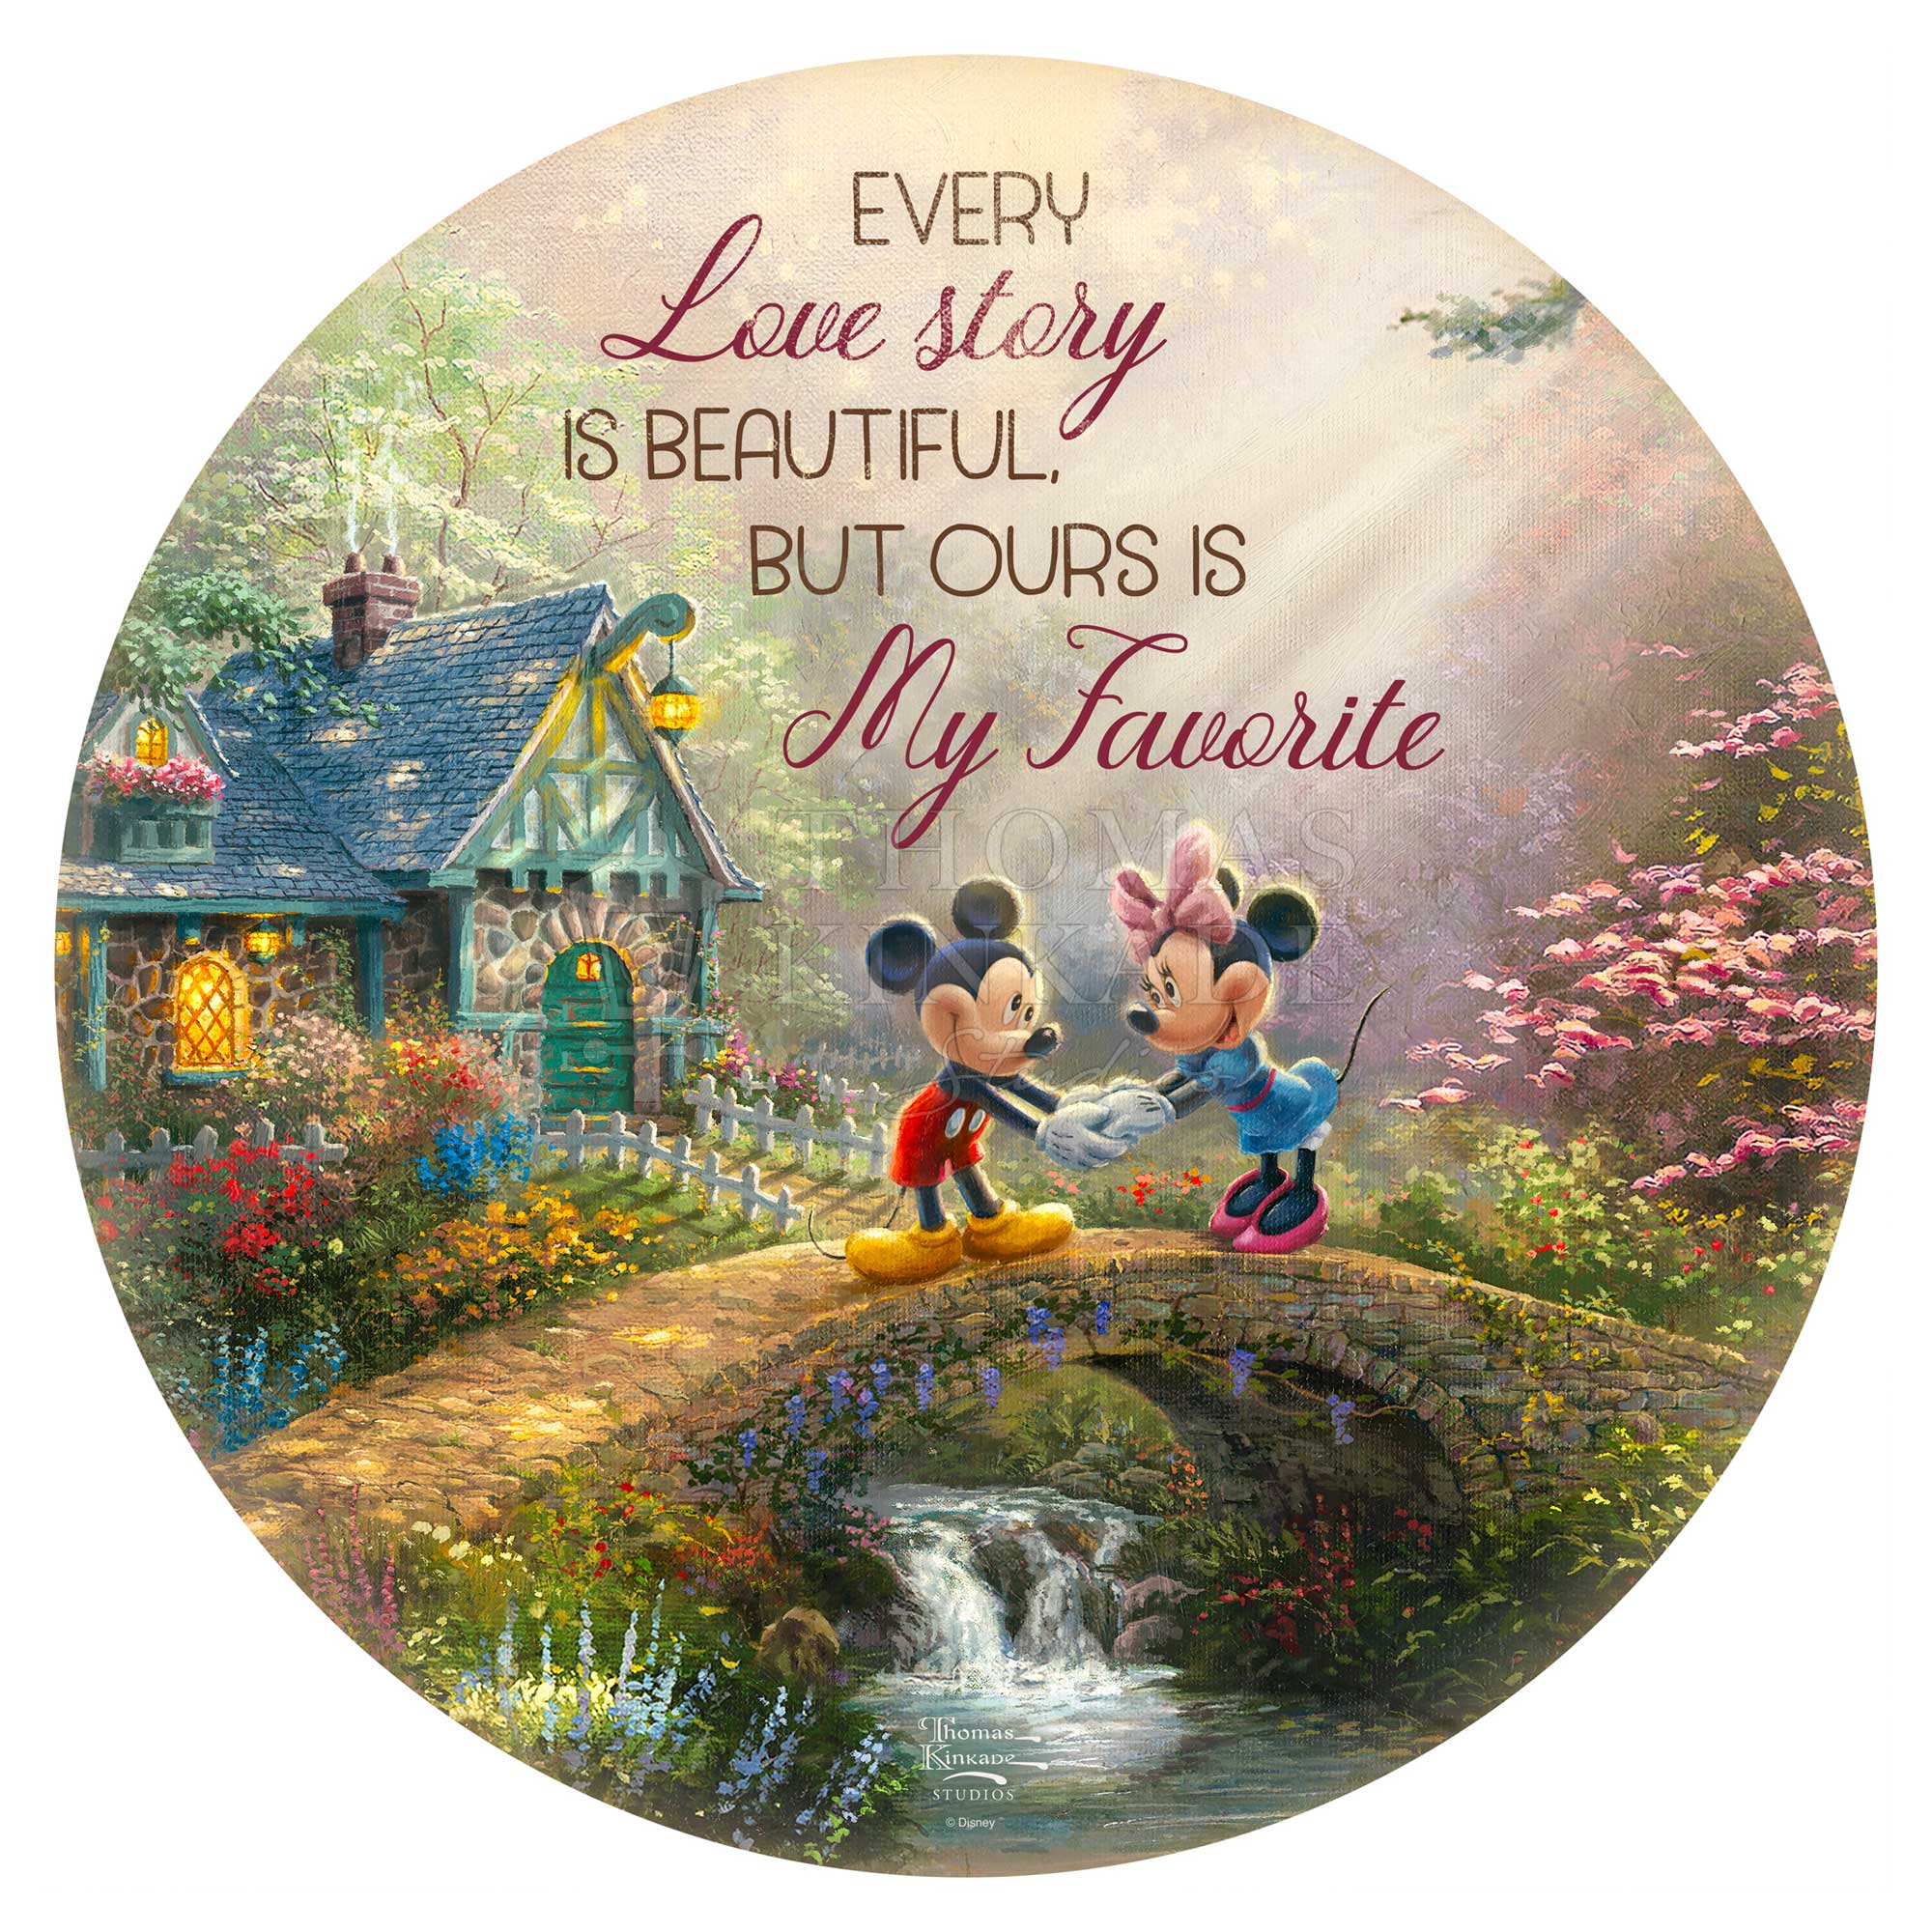  Mickey and Minnie Sweetheart Bridge - Wood Sign  EVERY Love Story IS BEAUTIFUL BUT OURS IS My Favorite!